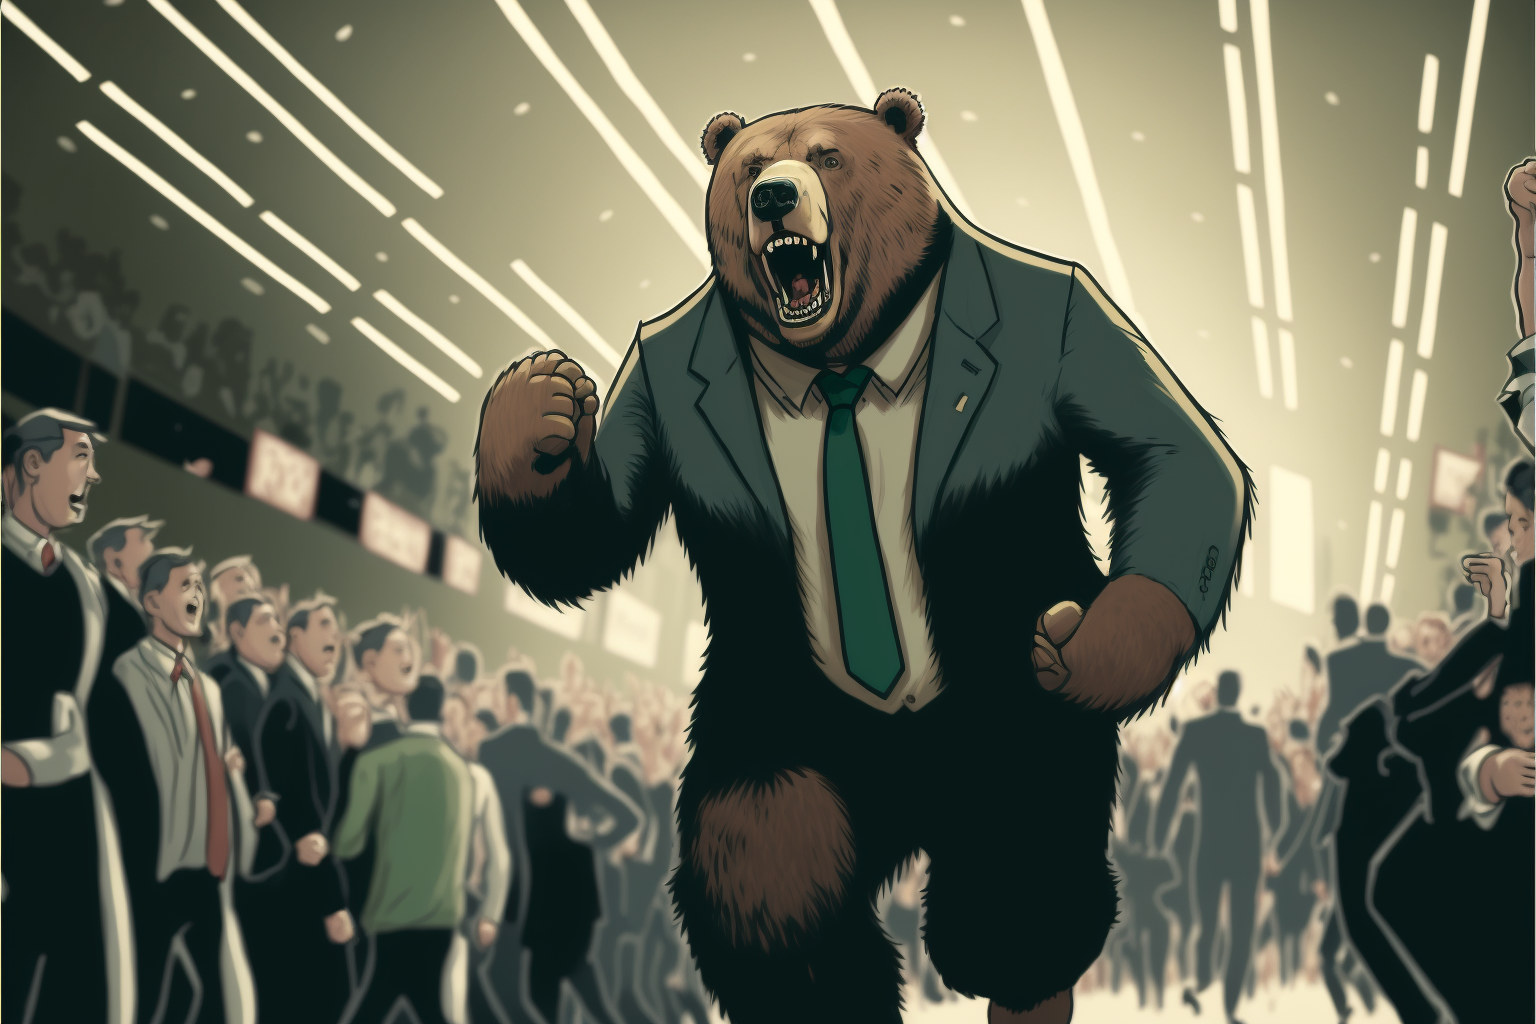 FloorSweeper_Roaring_Bear_in_a_suit_walking_on_a_trading_floor__998c4e73-9186-4213-98e8-06342e13336c.png